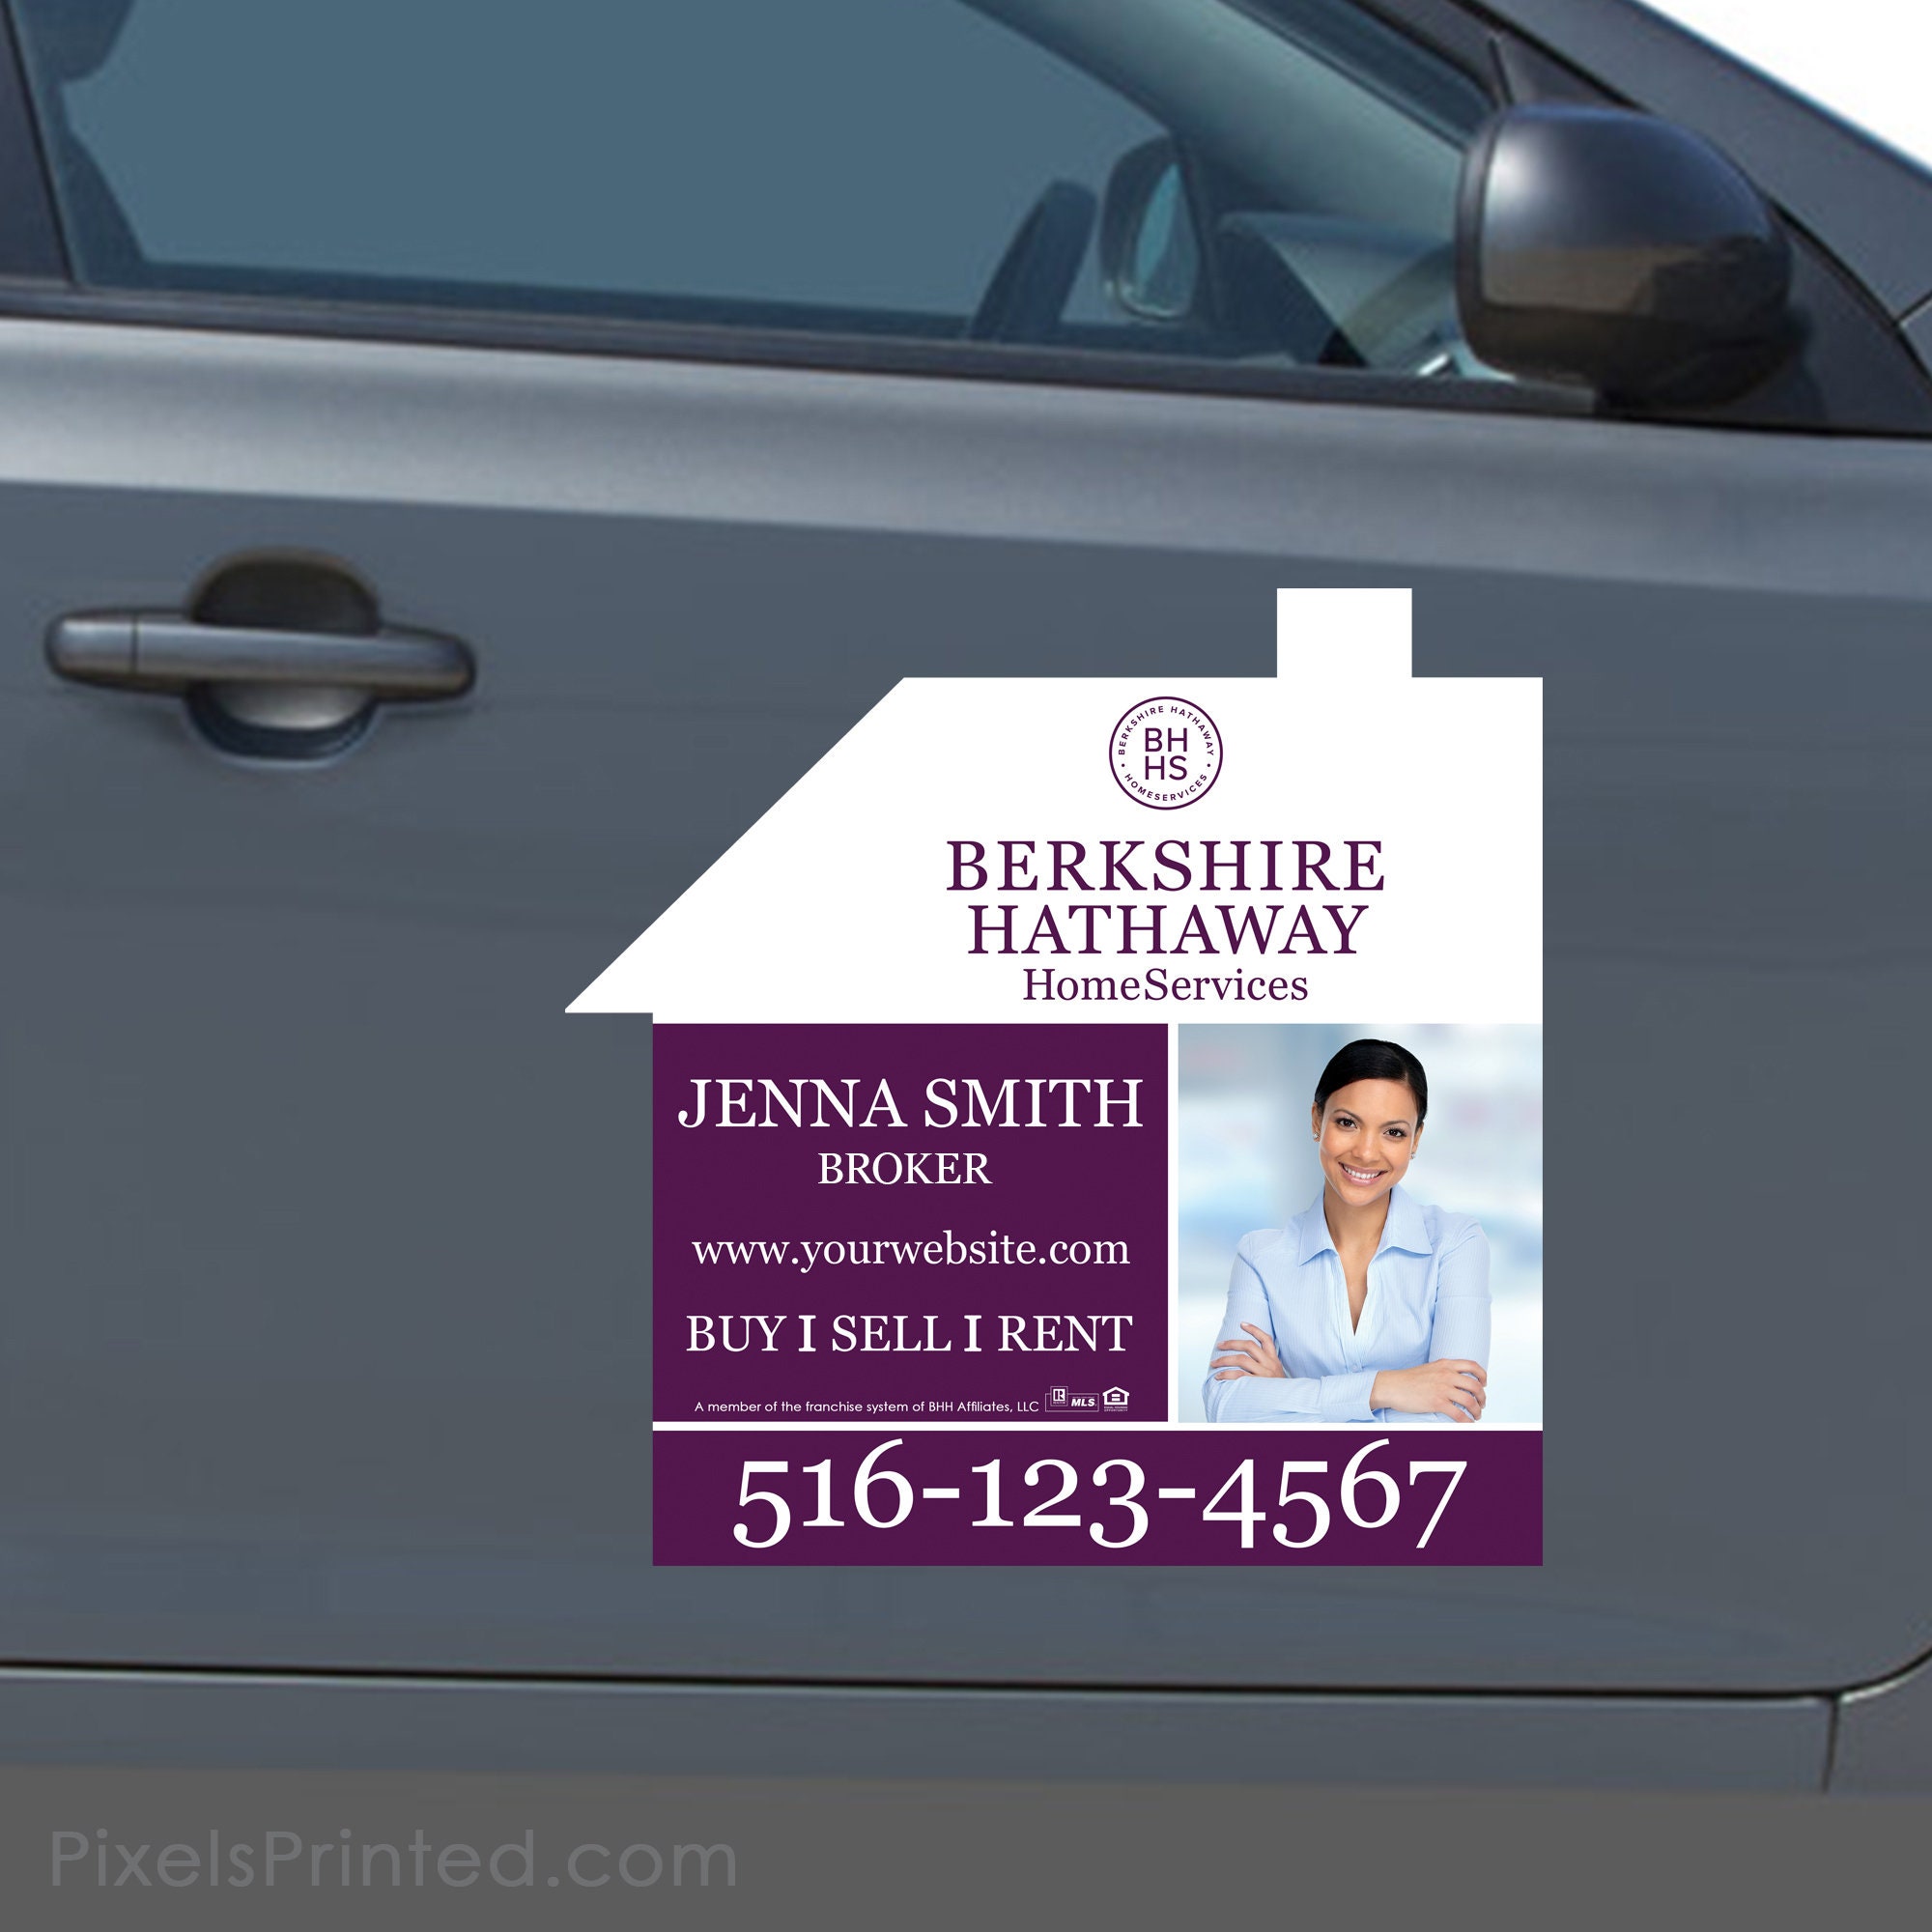 FREE UPS ground shipping durable Berkshire Hathaway house shaped car magnets set of TWO magnets 23x23